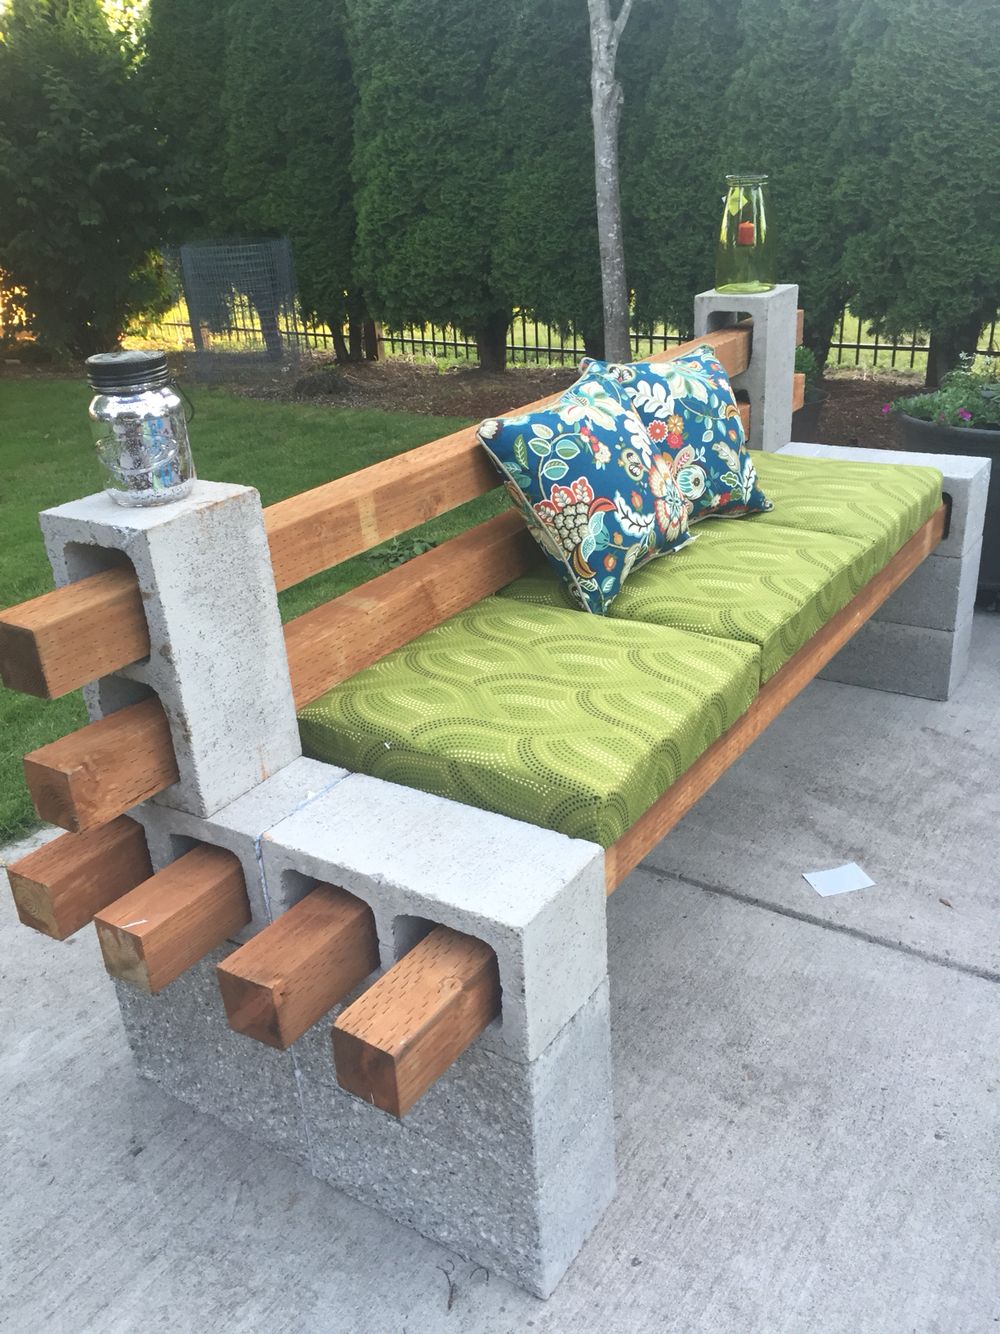 cinder block bench 13 diy patio furniture ideas that are simple and cheap ... VQEUADH